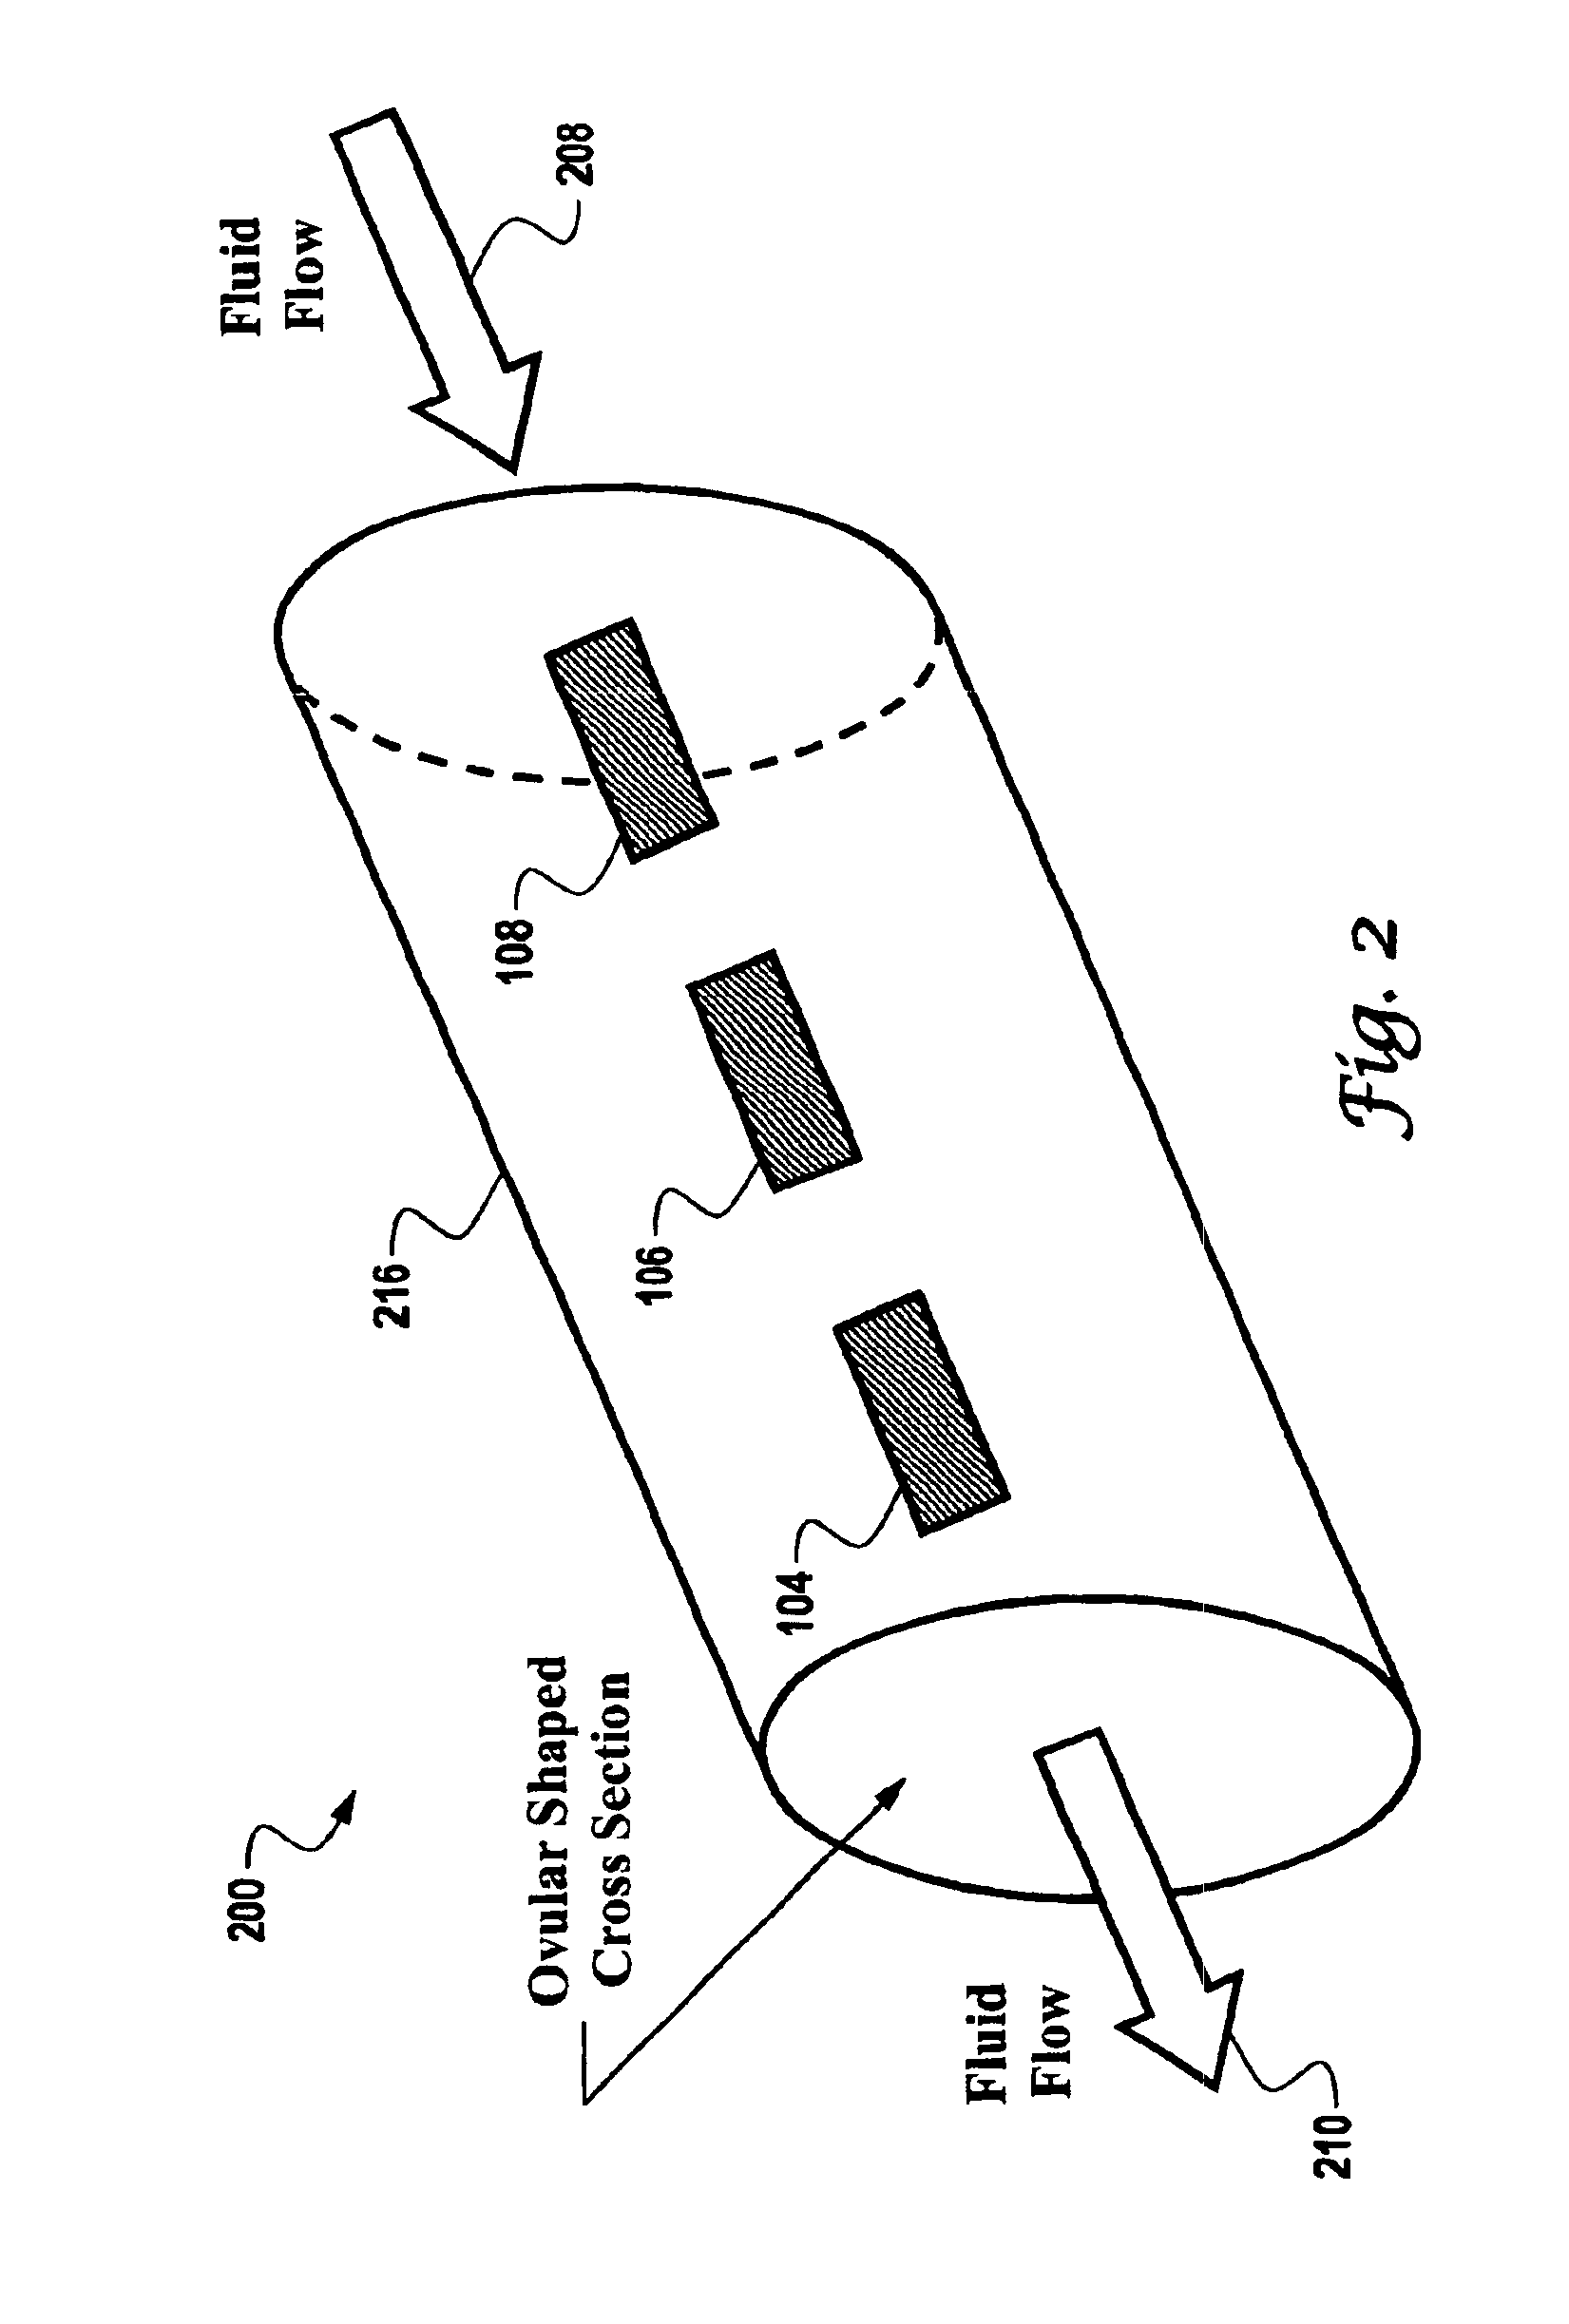 Liquid flow sensor thermal interface methods and systems